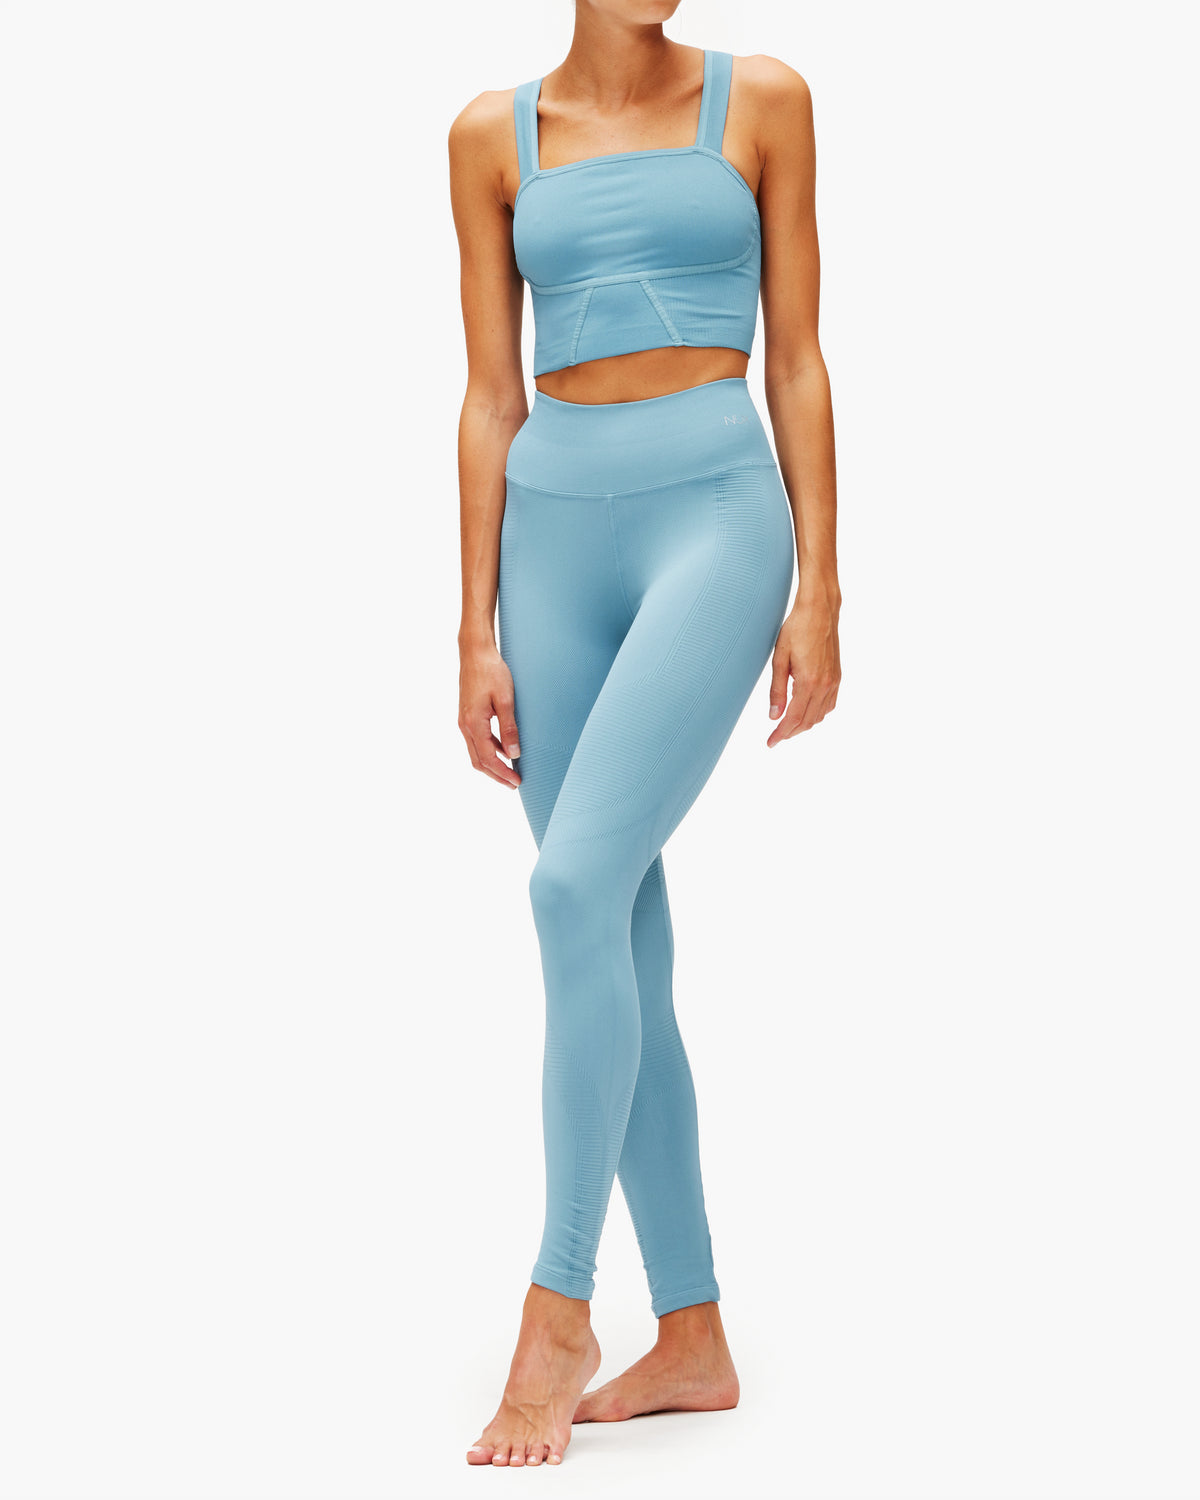 Nux One By One Legging – The Shop at Equinox